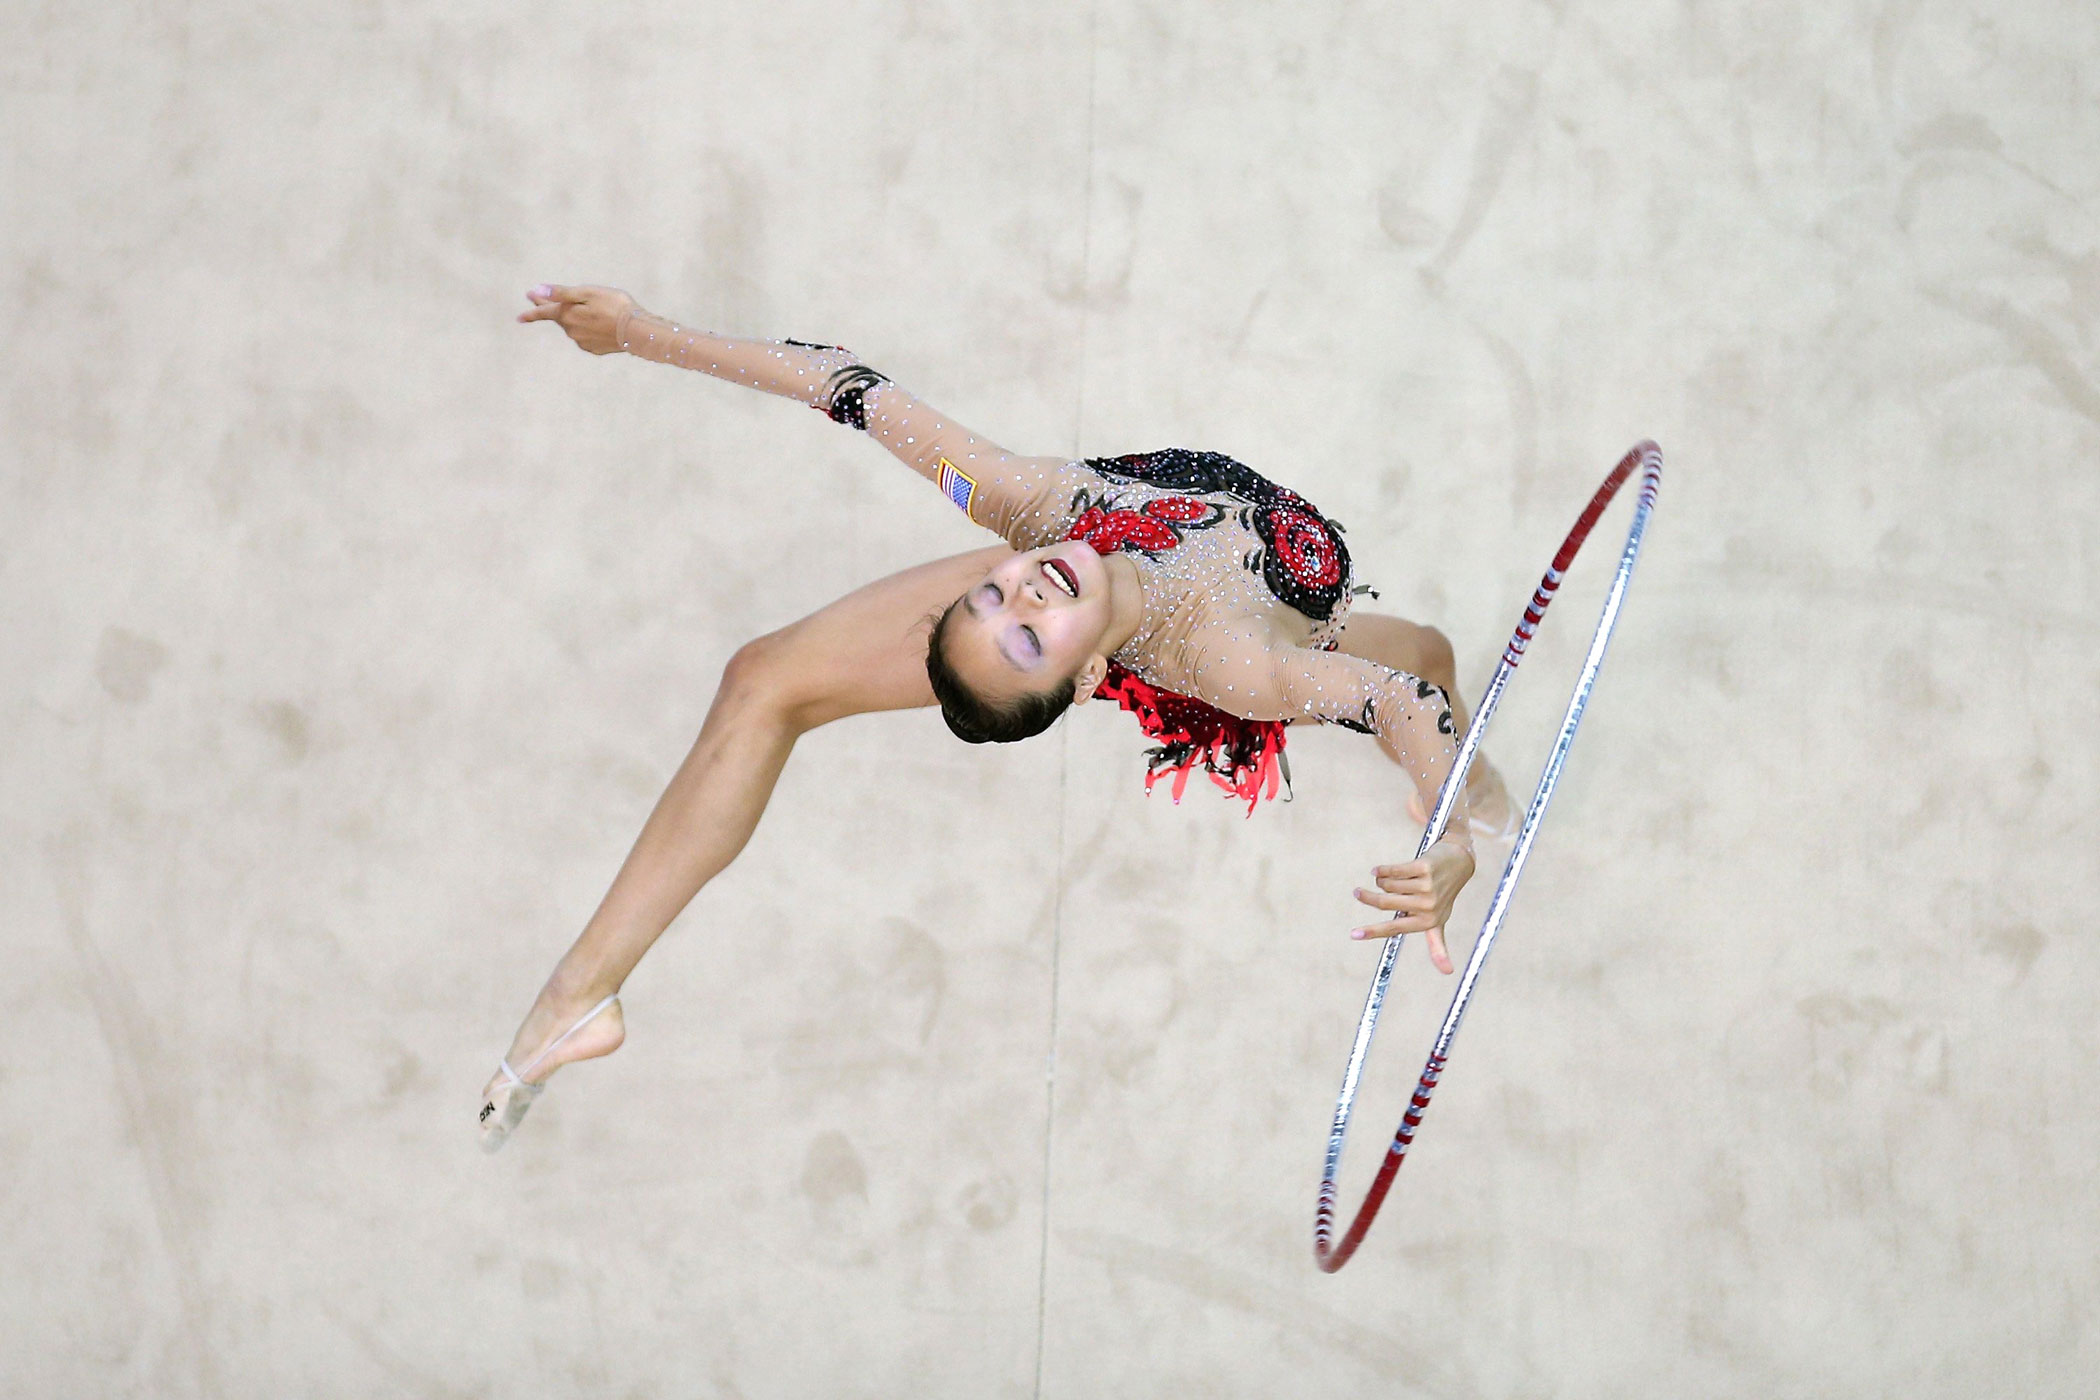 Laura Zeng of the United States competes in Rhythmic Gymnastics Individual All-Around Qualification on day ten of the Nanjing 2014 Summer Youth Olympic Games at Nanjing OSC Gymnasium on Aug. 26, 2014 in Nanjing.